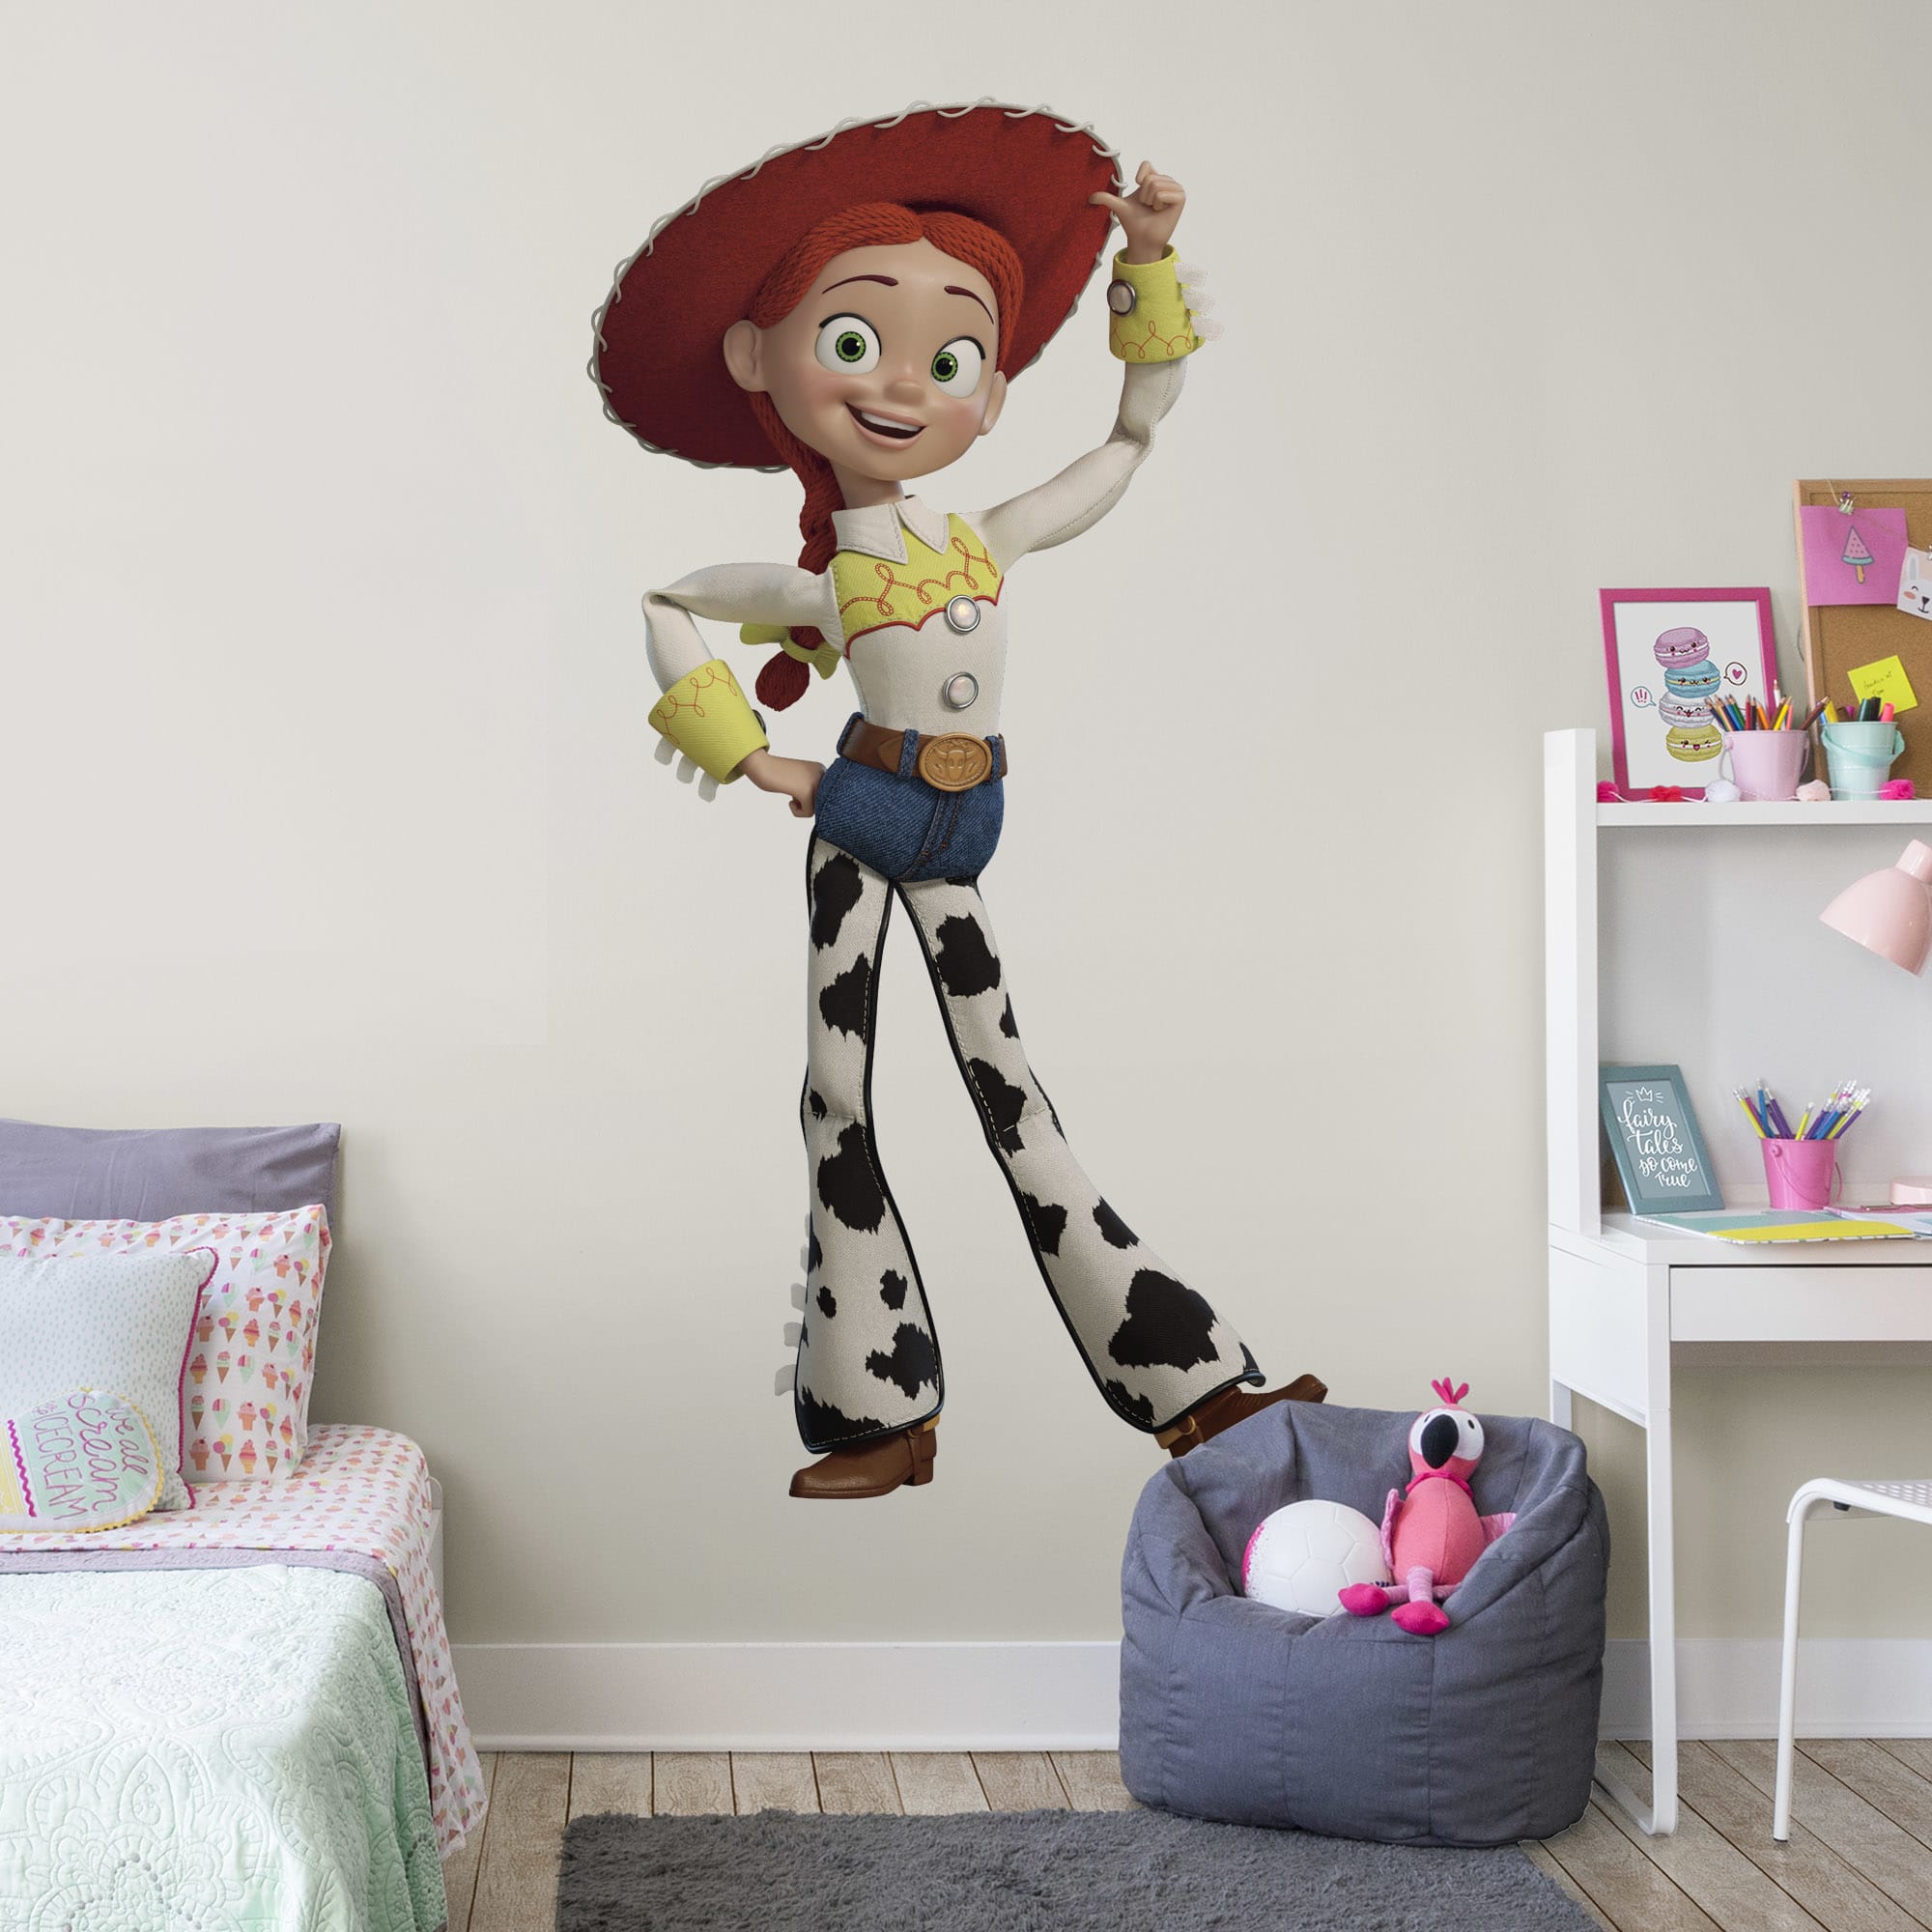 Toy Story 4: Jessie - Officially Licensed Disney/PIXAR Removable Wall Decal Huge Character + 2 Decals (41"W x 78"H) by Fathead |